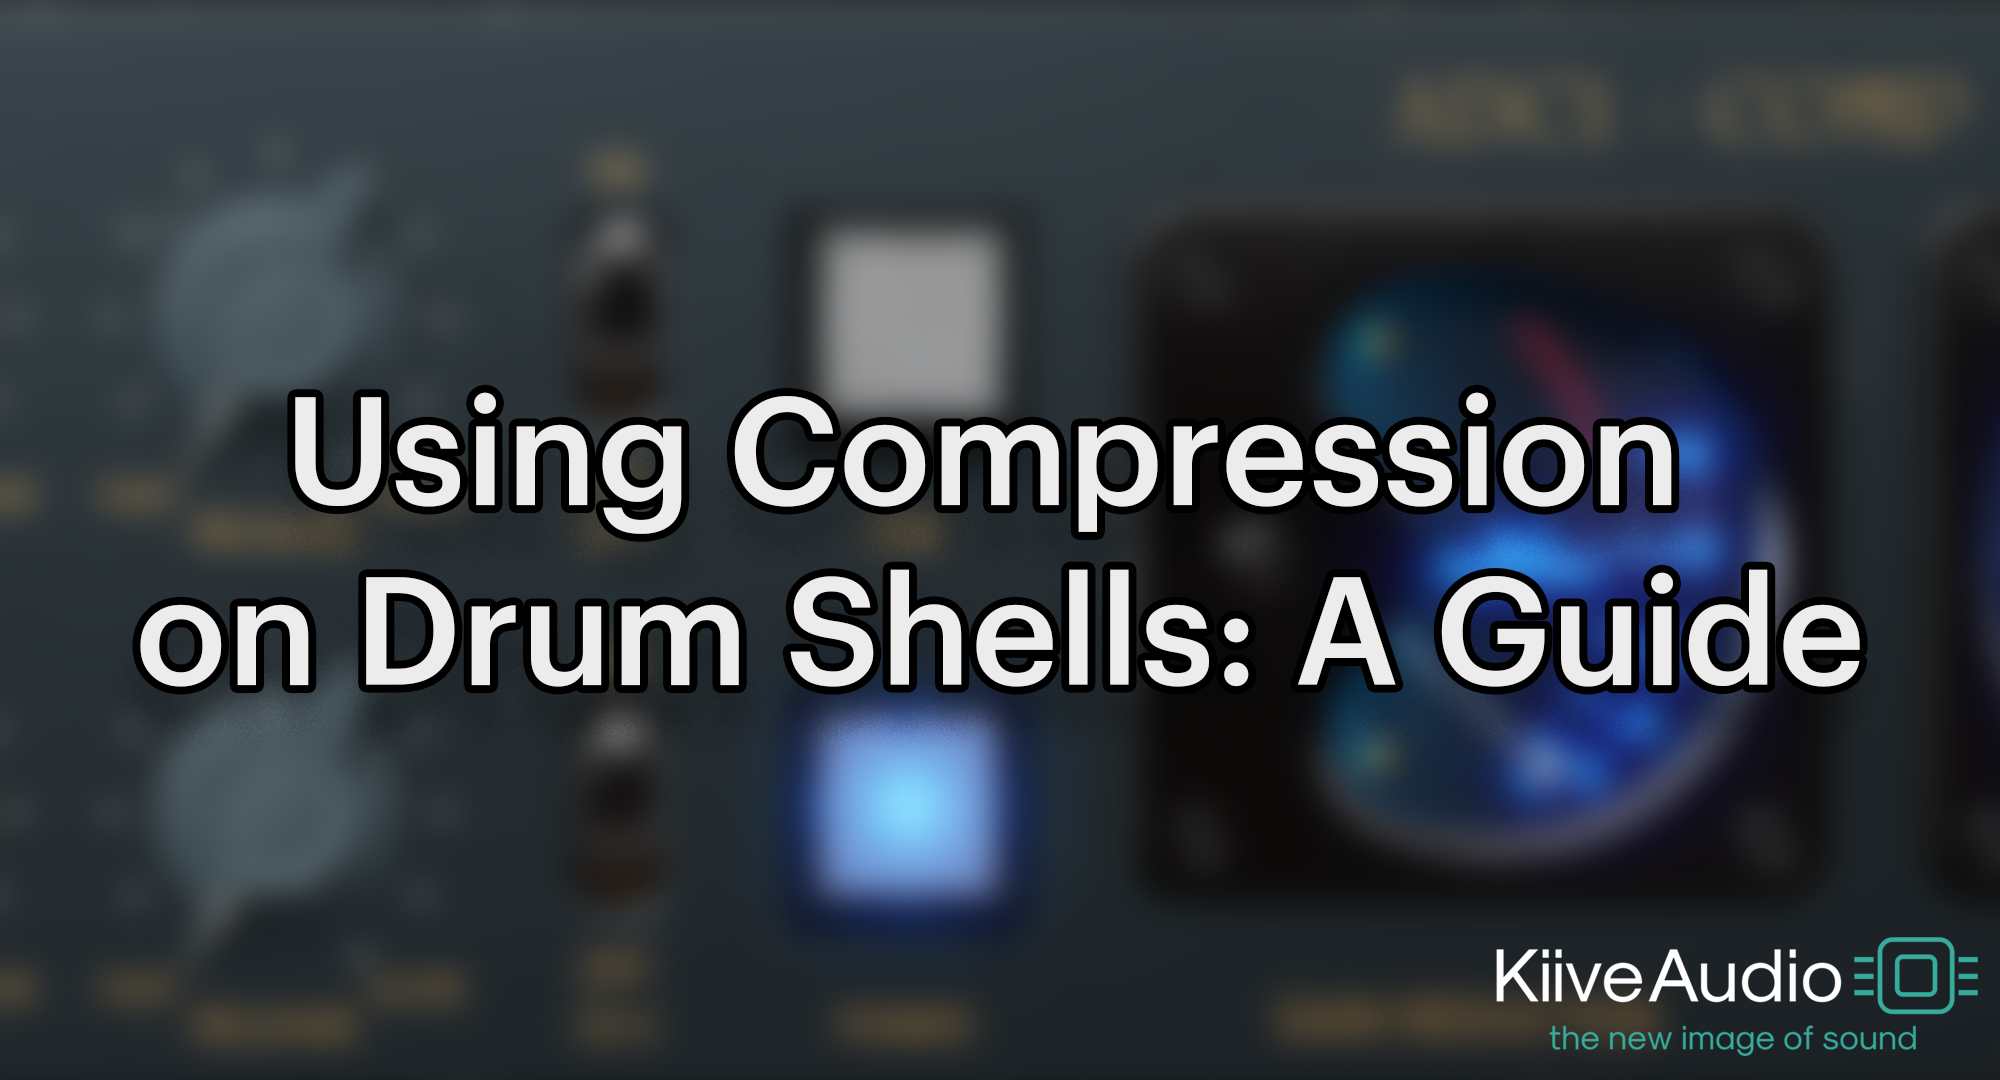 Using Compression on Drum Shells: A Guide